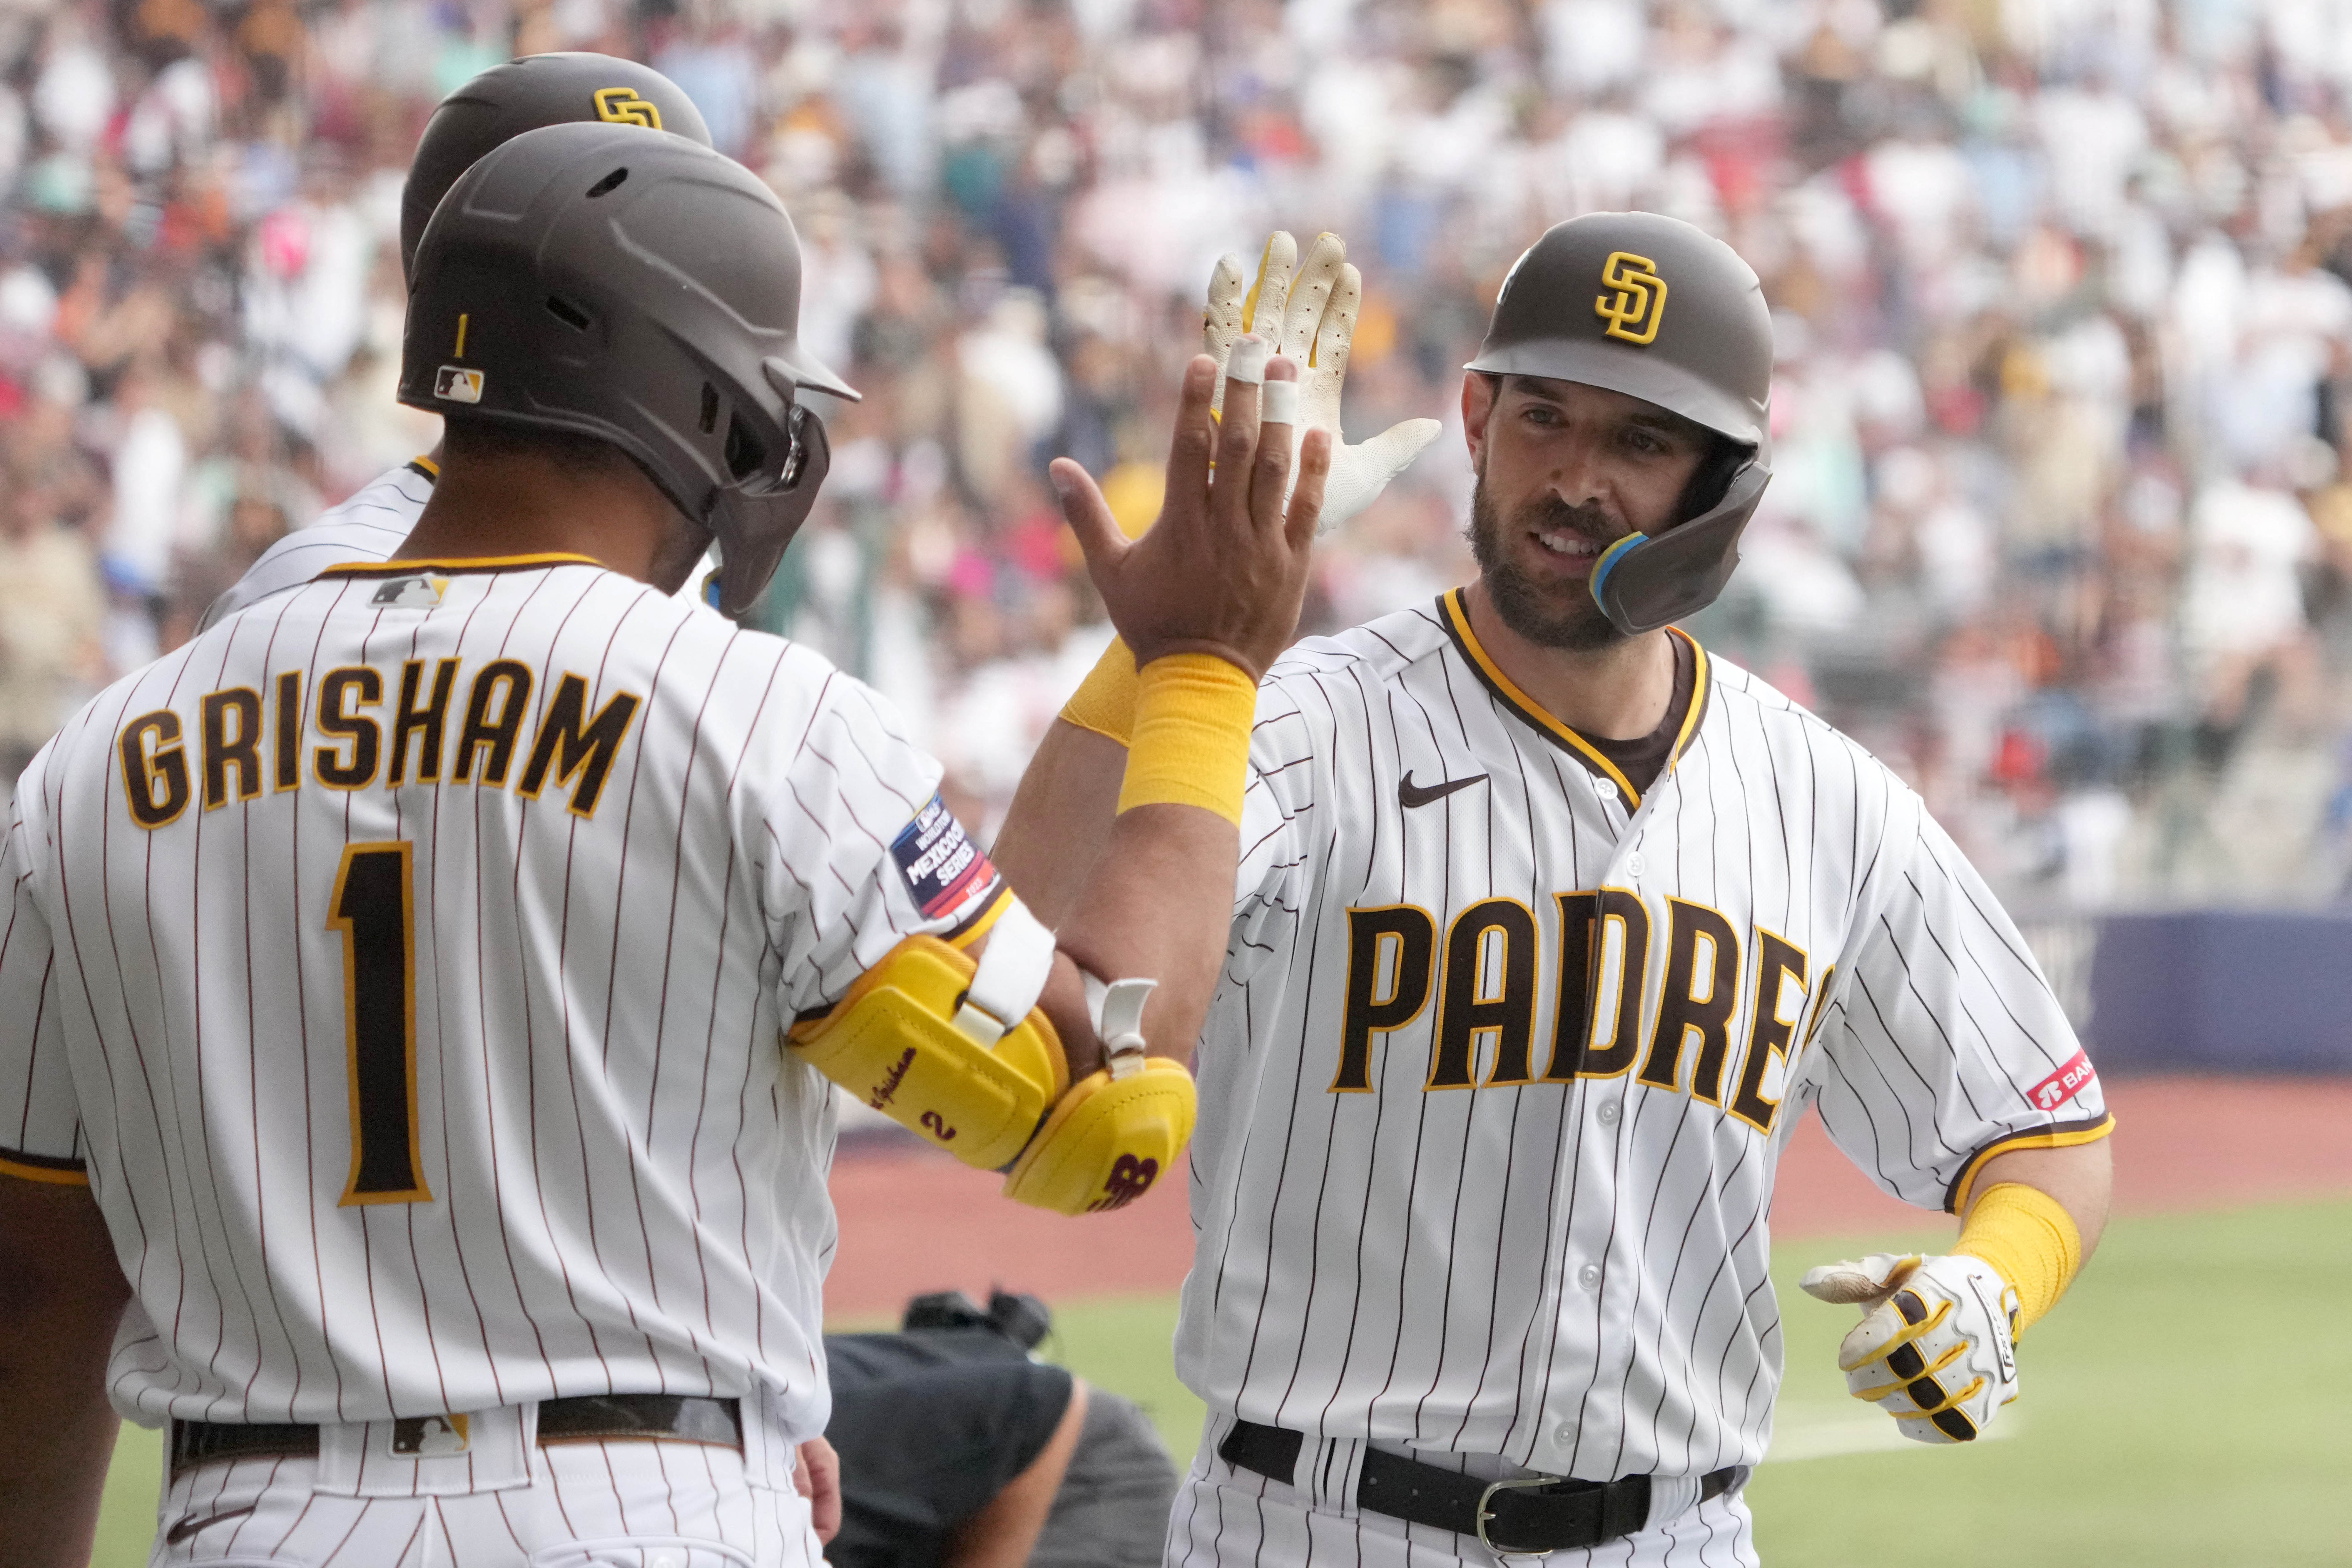 Padres Dominate Giants in MLB's Mexico City Series - The New York Times